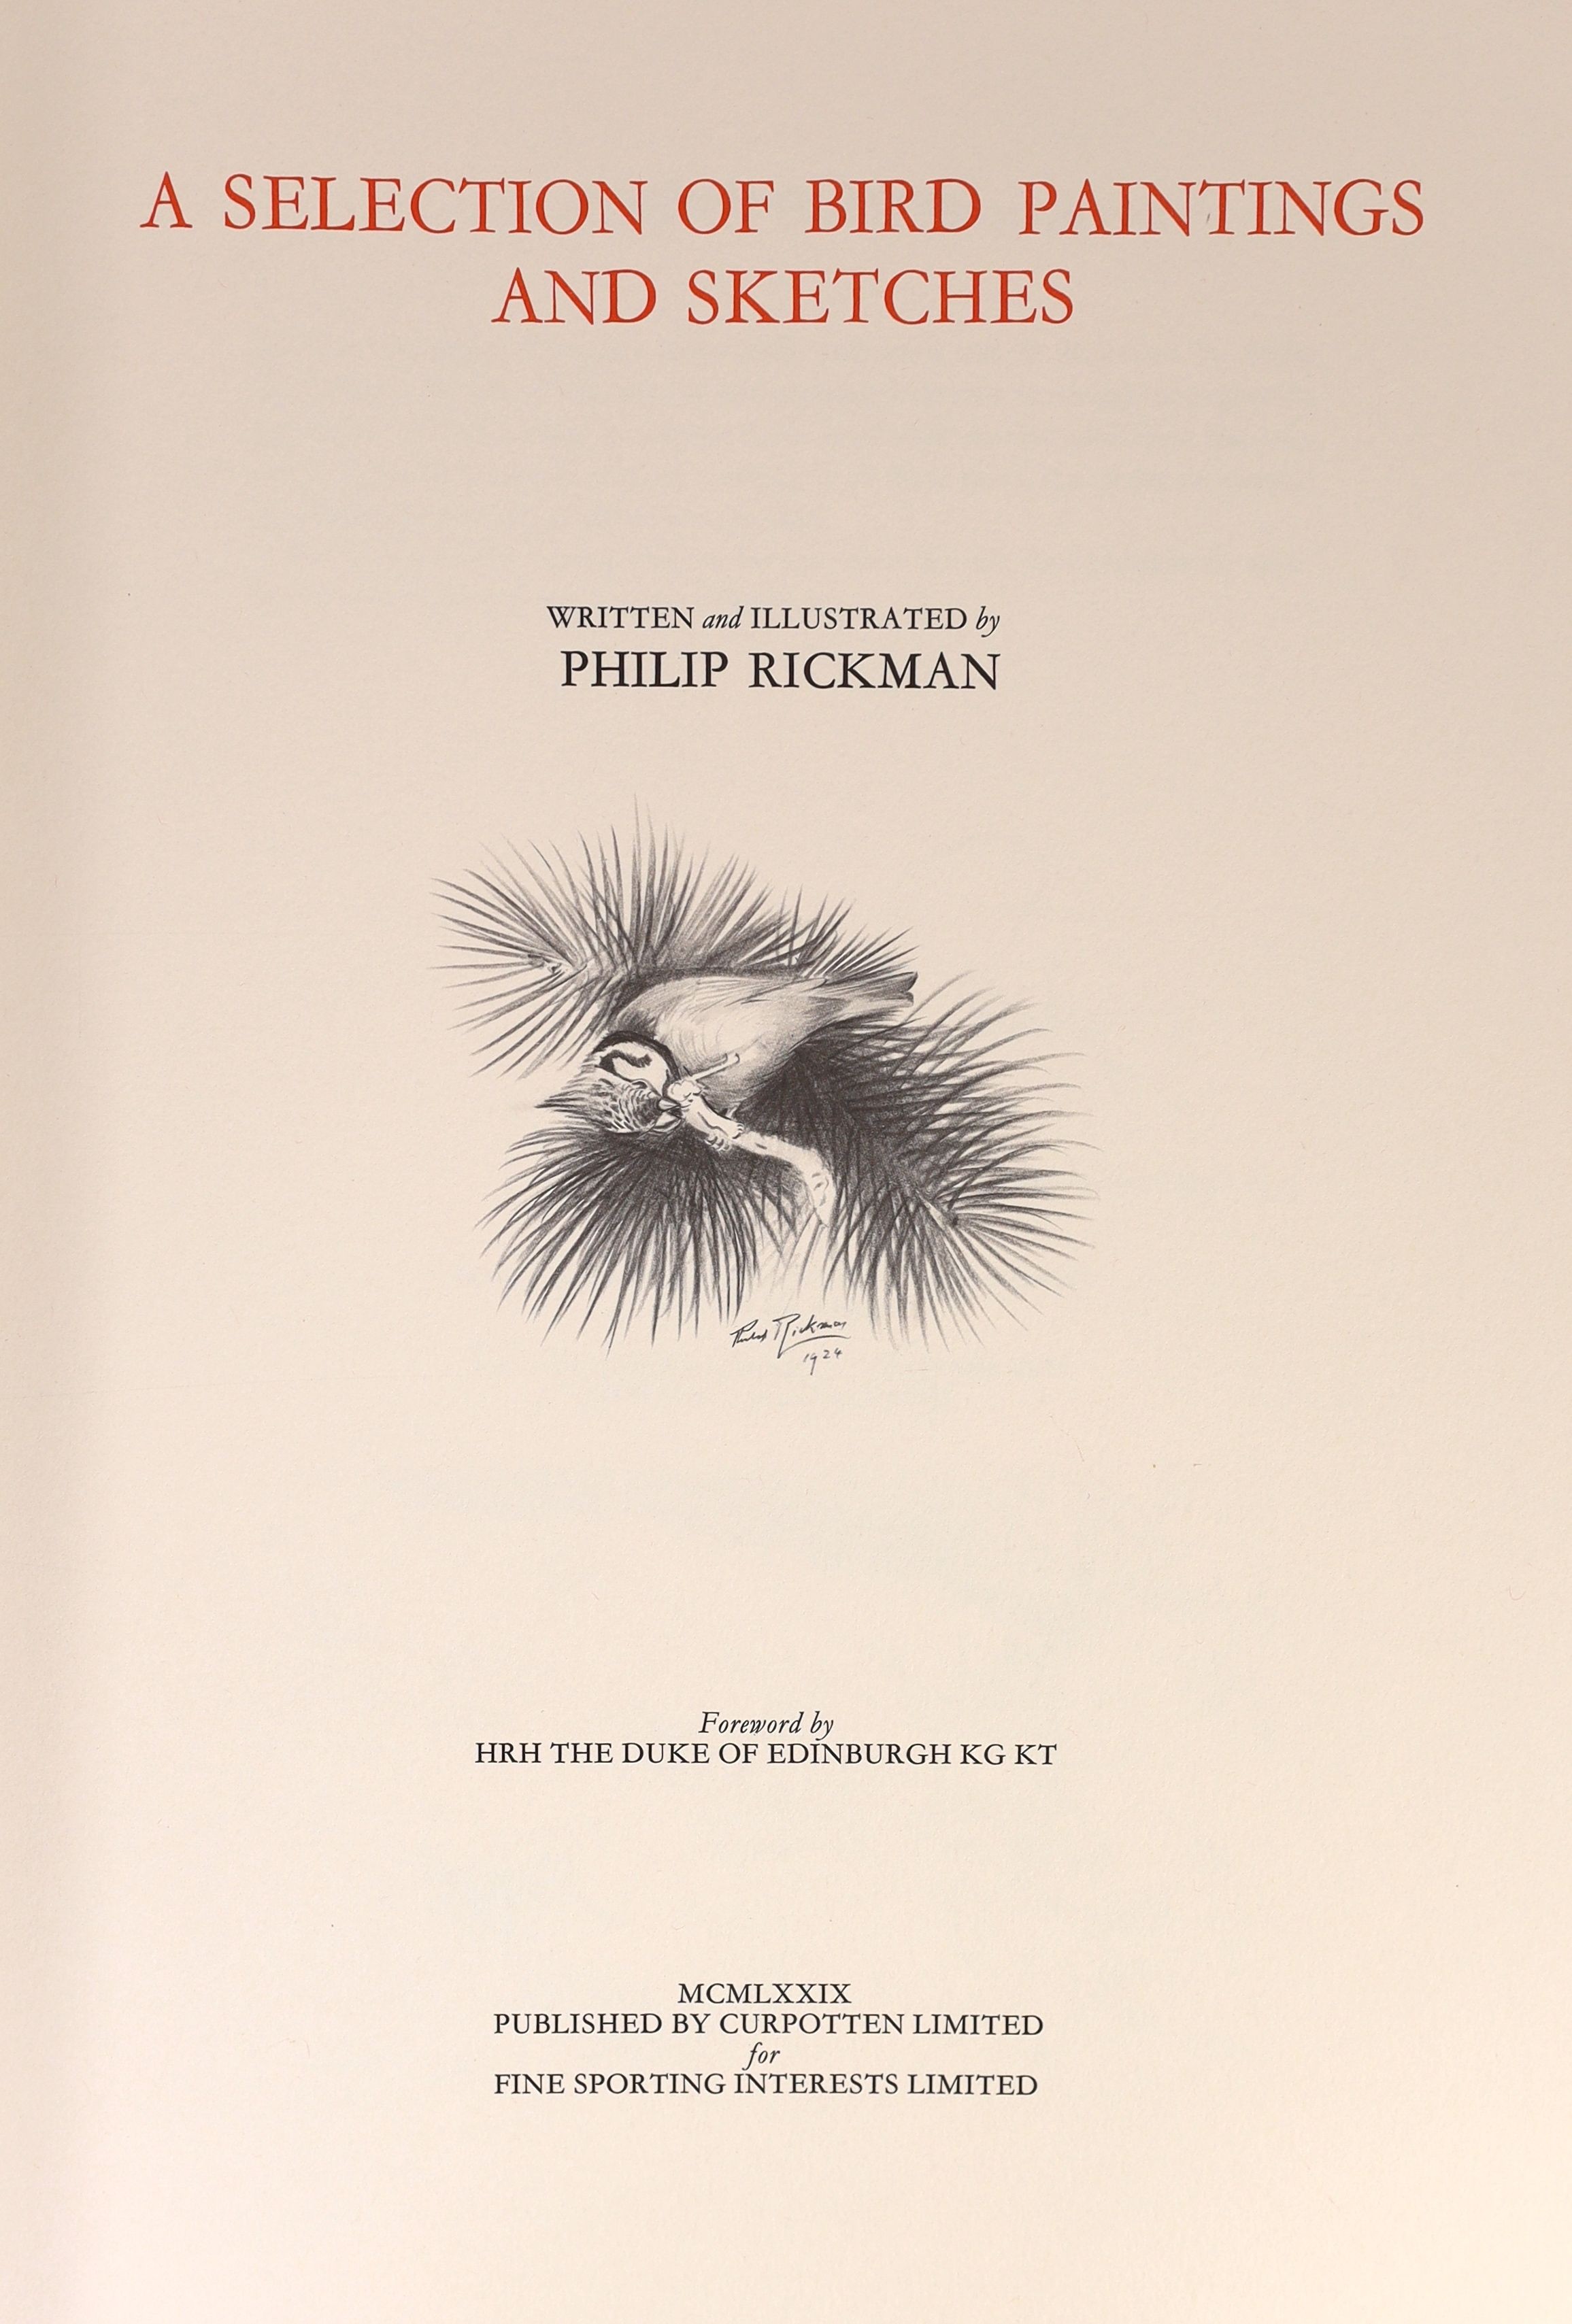 Rickman, Philip - A Selection of Bird Paintings and Sketches, one of 500 signed by the artist, folio, original half green morocco gilt, with mounted portrait and 31 mounted plates, Curpotten Ltd., London, 1979, in slip c